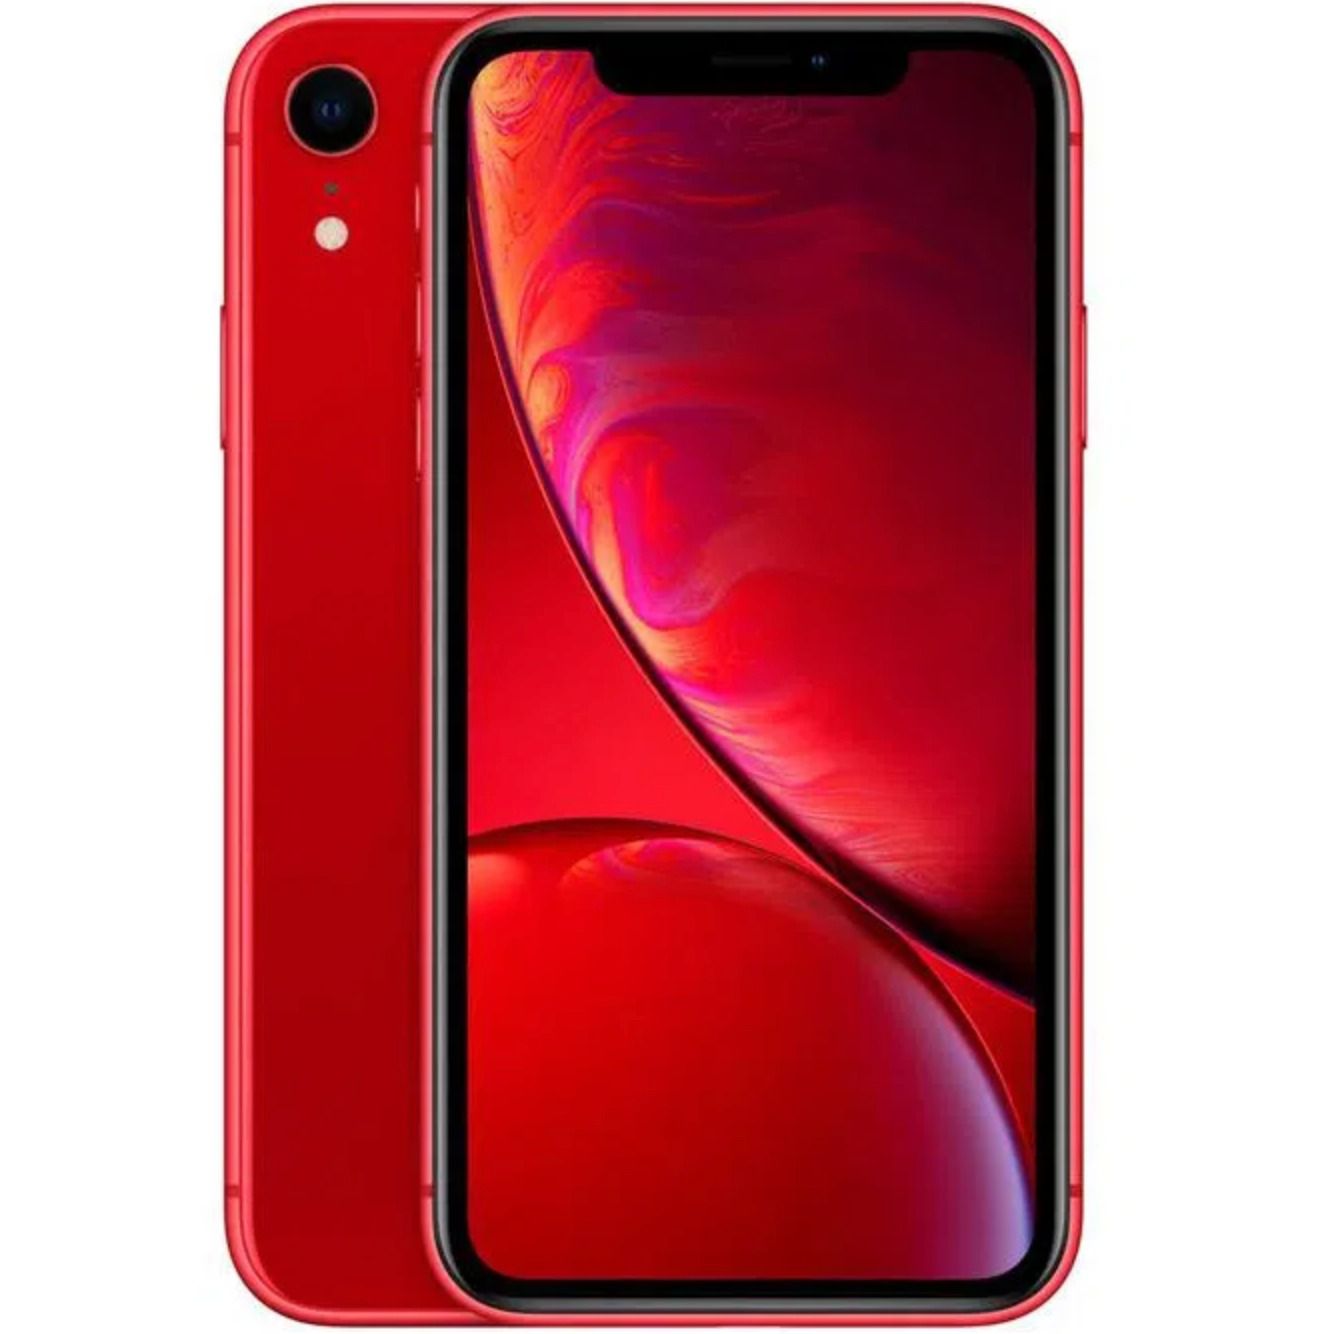 iPhone XR Apple 128GB (PRODUCT)RED 30364 - Canaltech Ofertas